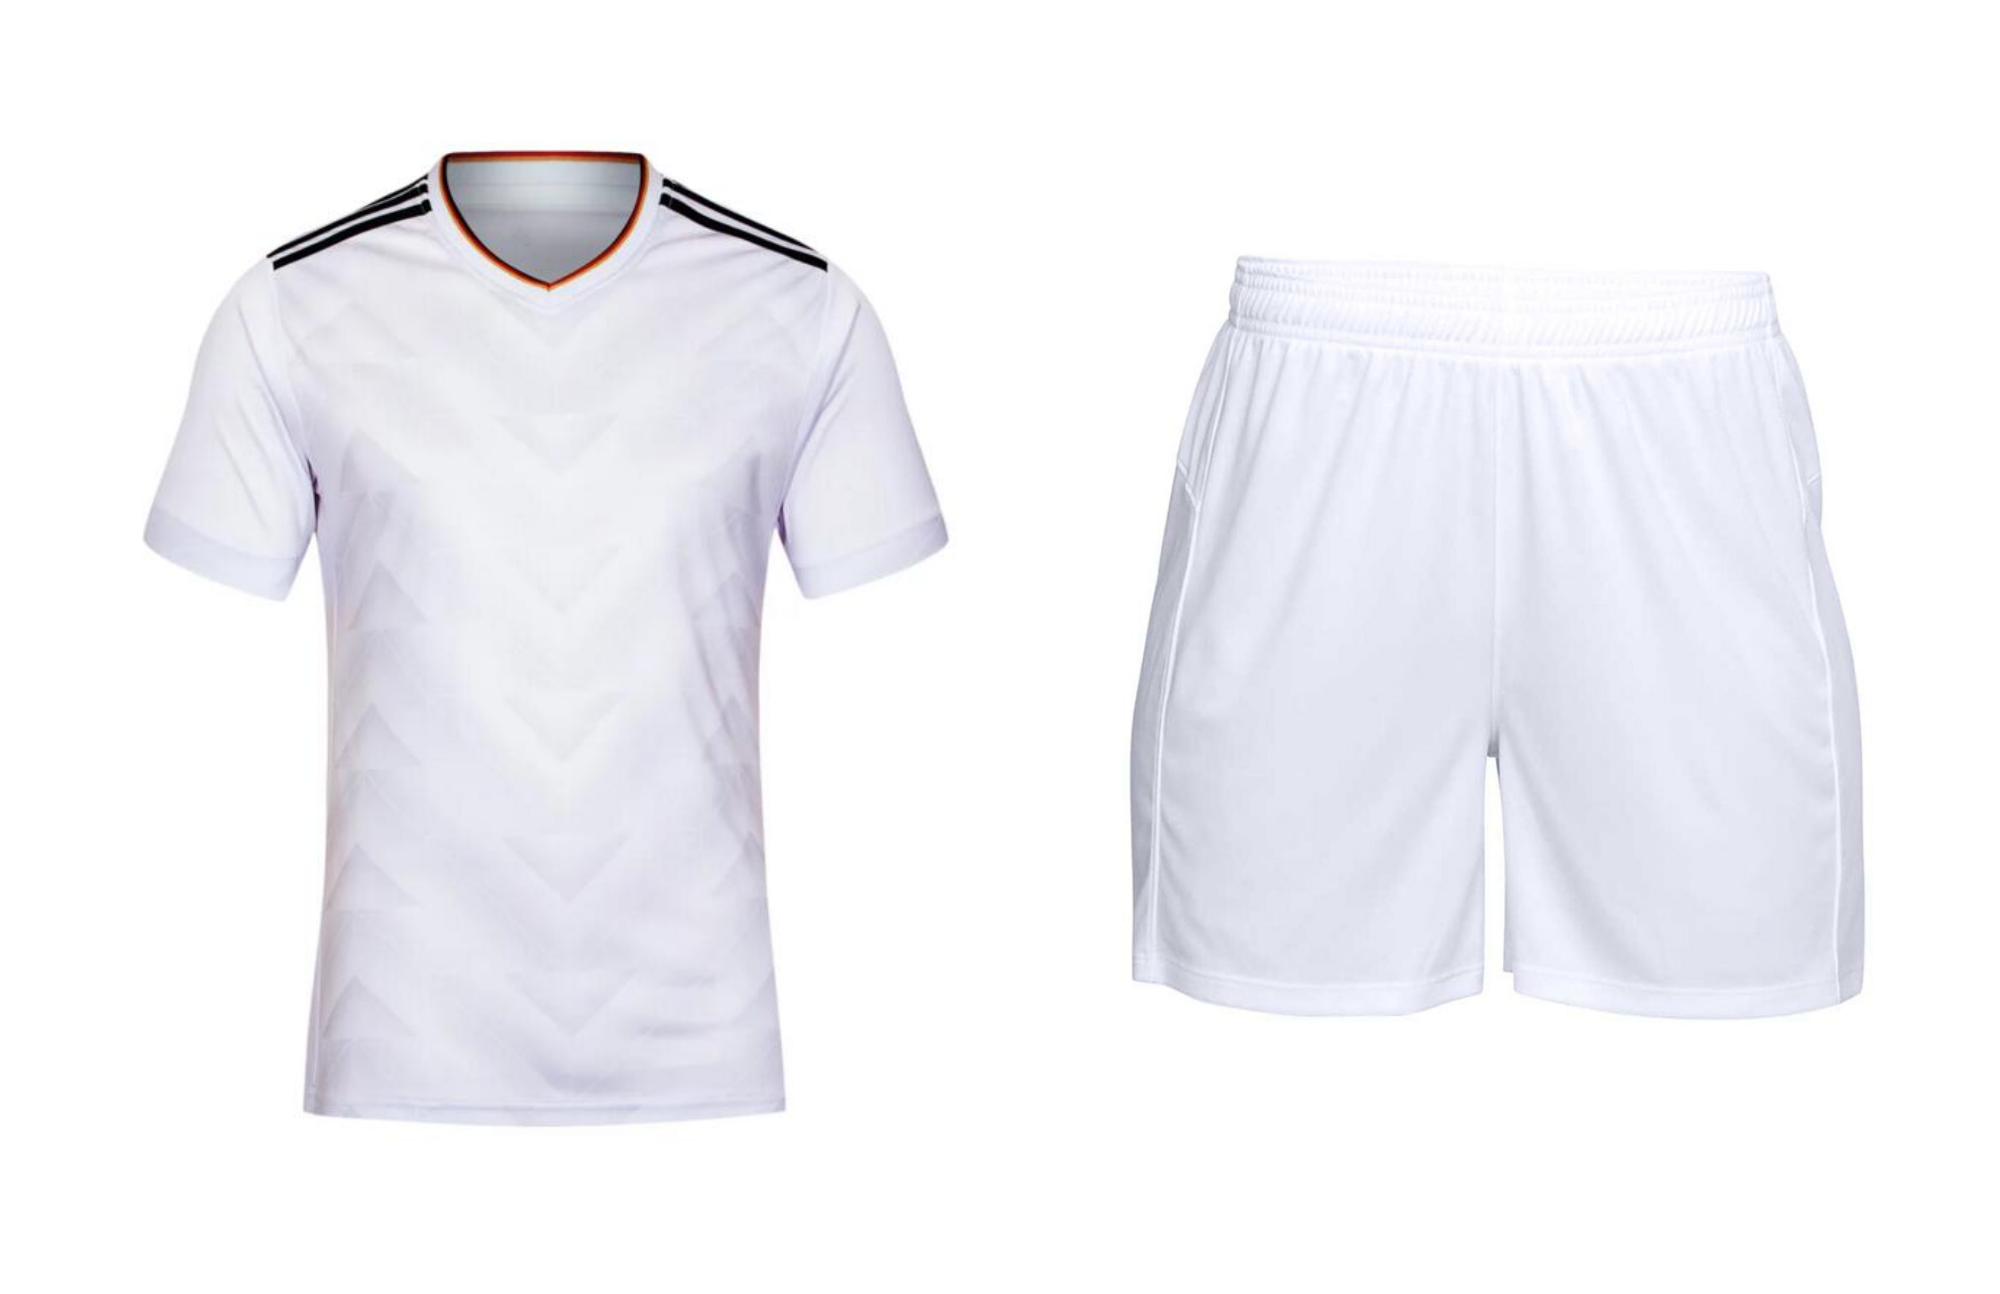 Plain T-shirt and shorts for soccer